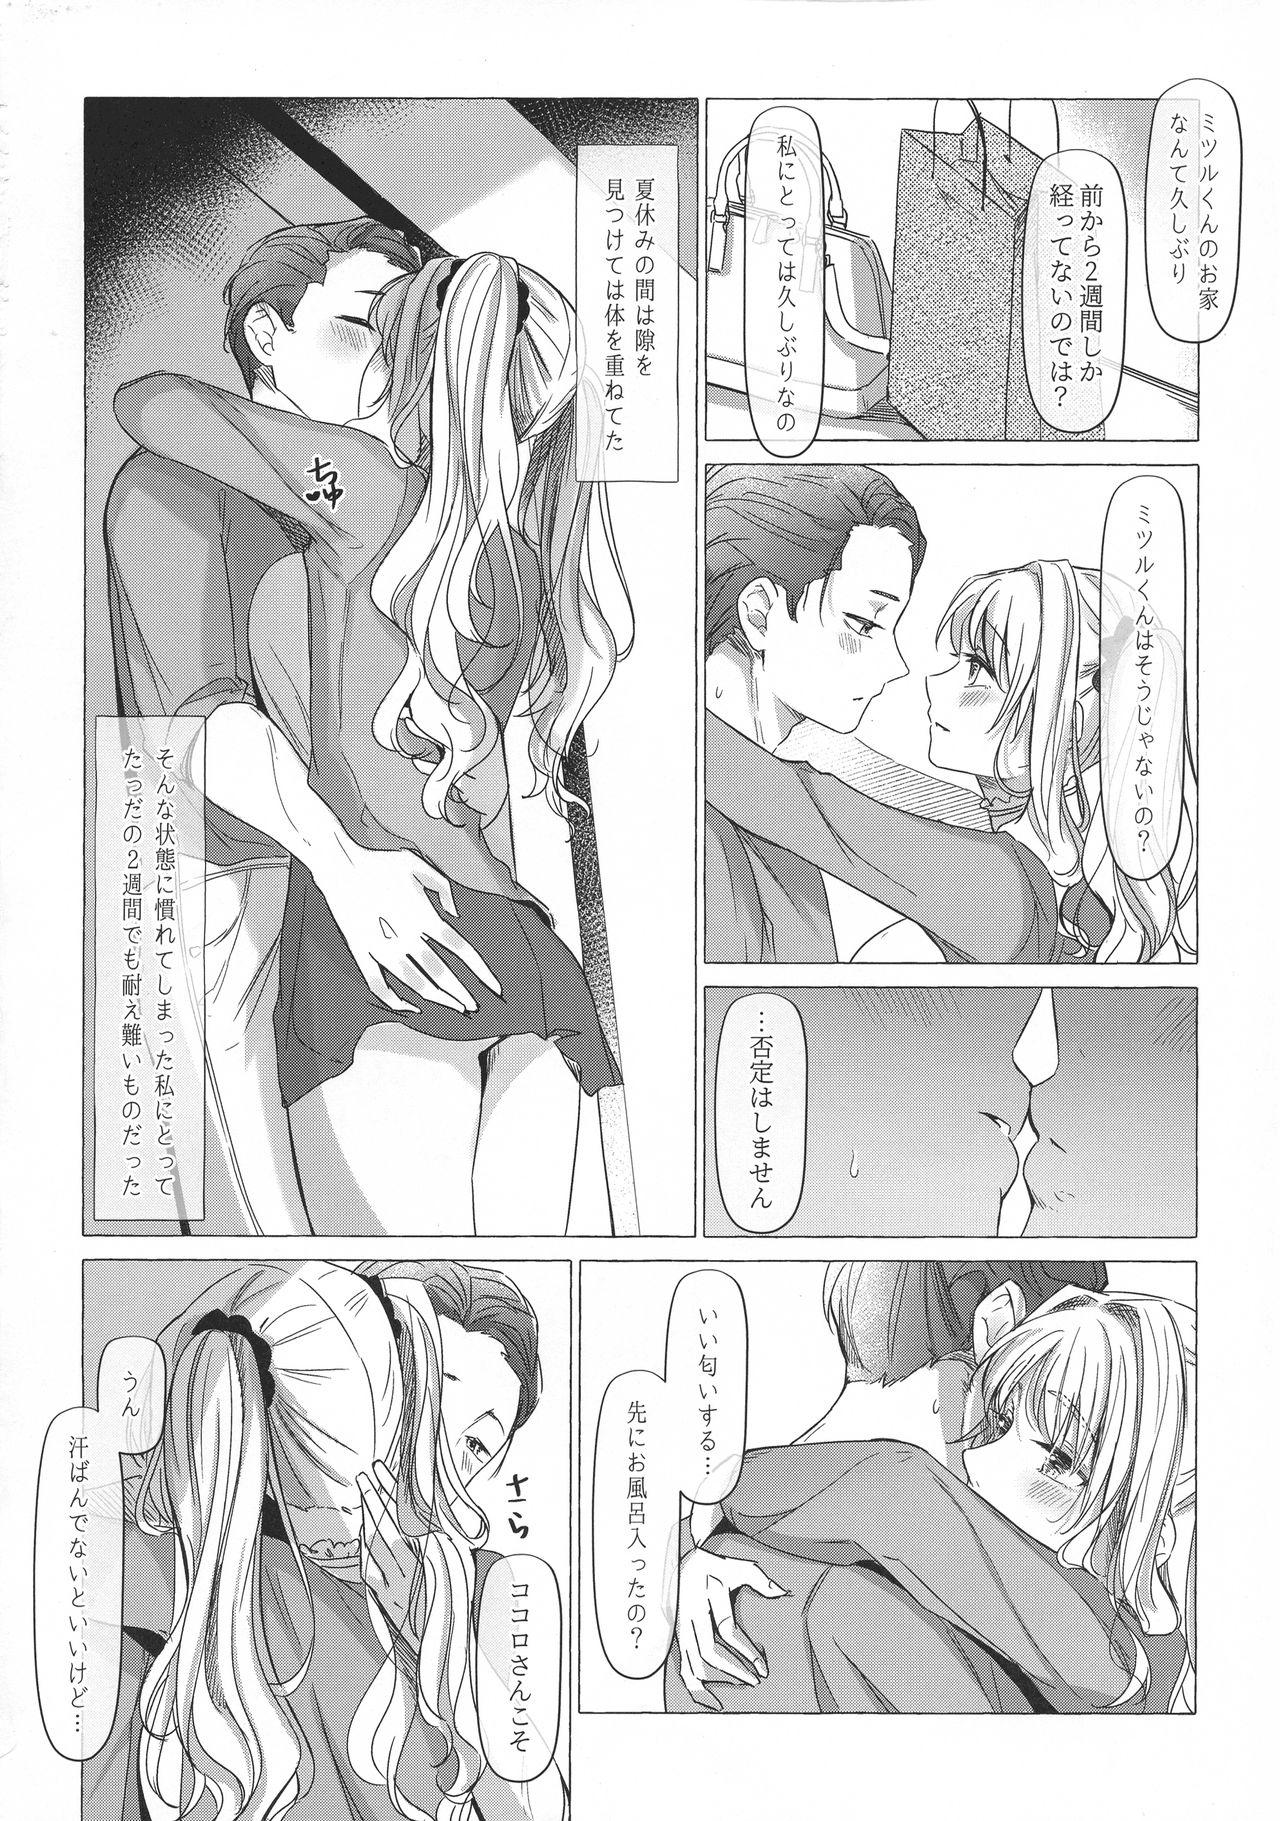 Piroca 満心総意の躾 - Darling in the franxx Hard Cock - Page 11